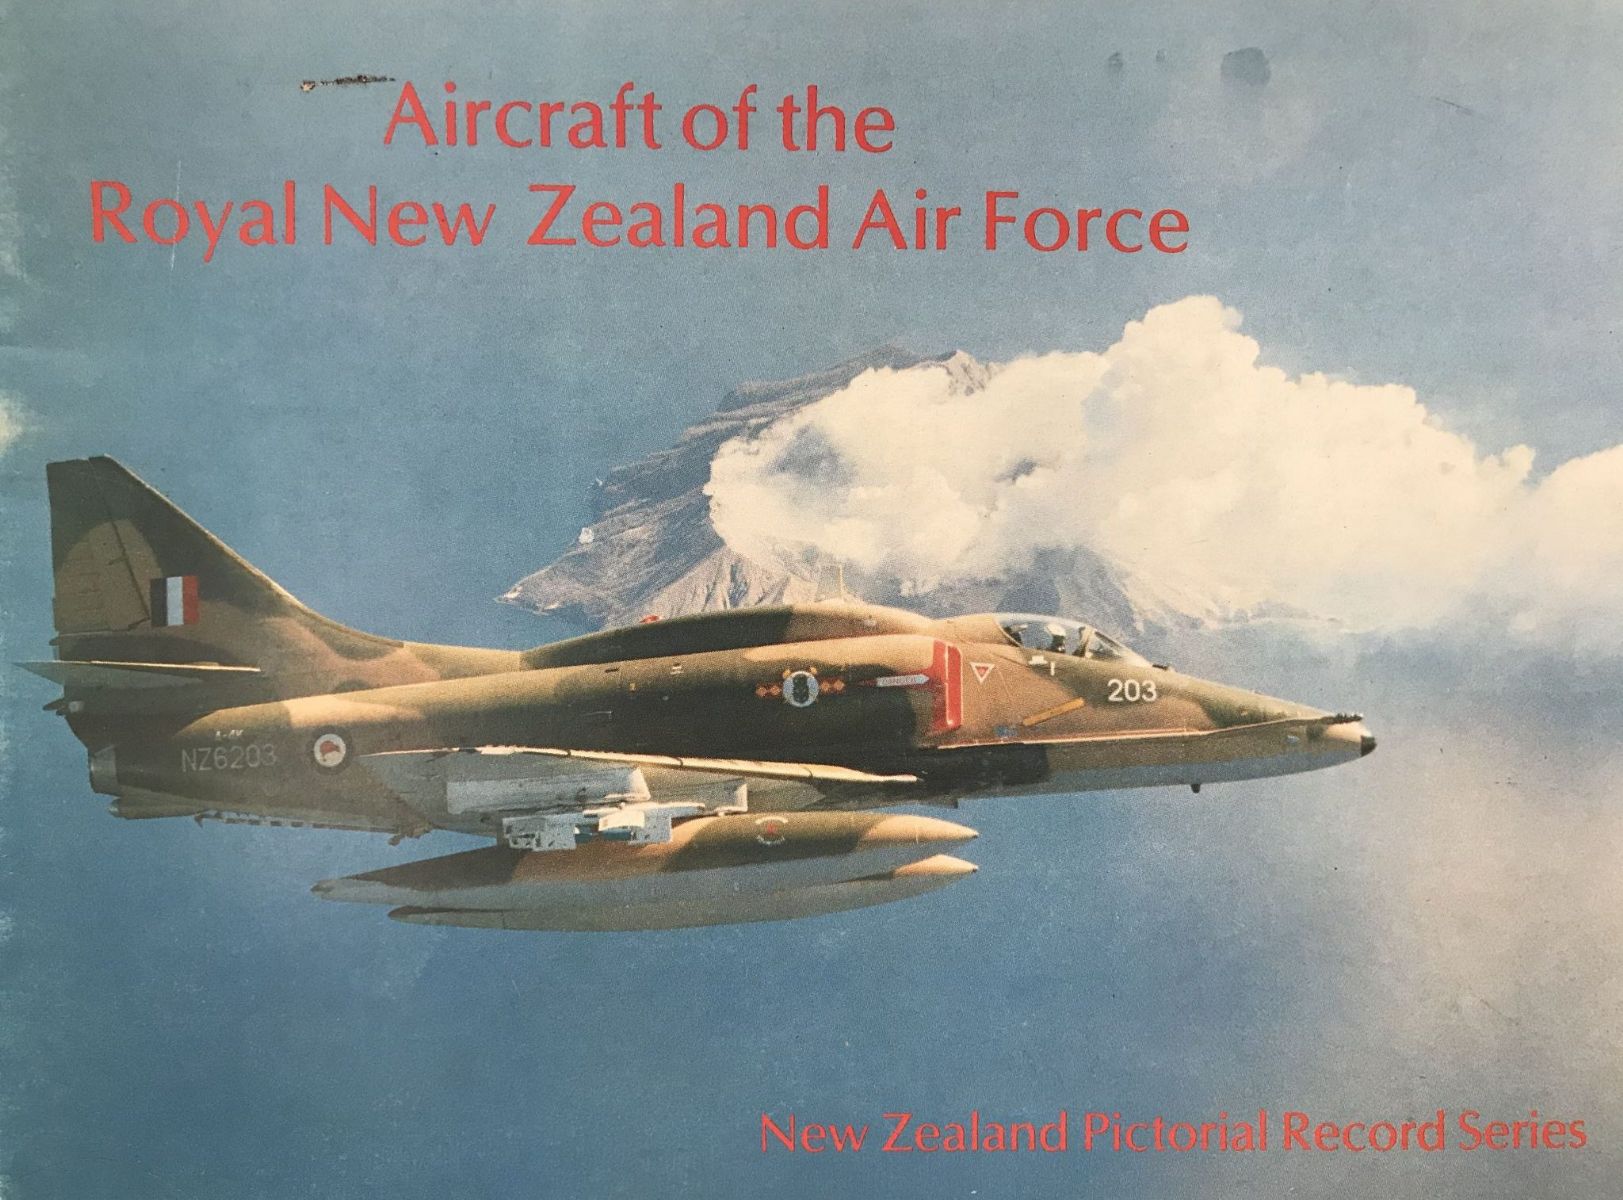 AIRCRAFT OF THE ROYAL NEW ZEALAND AIR FORCE: Pictorial Record Series